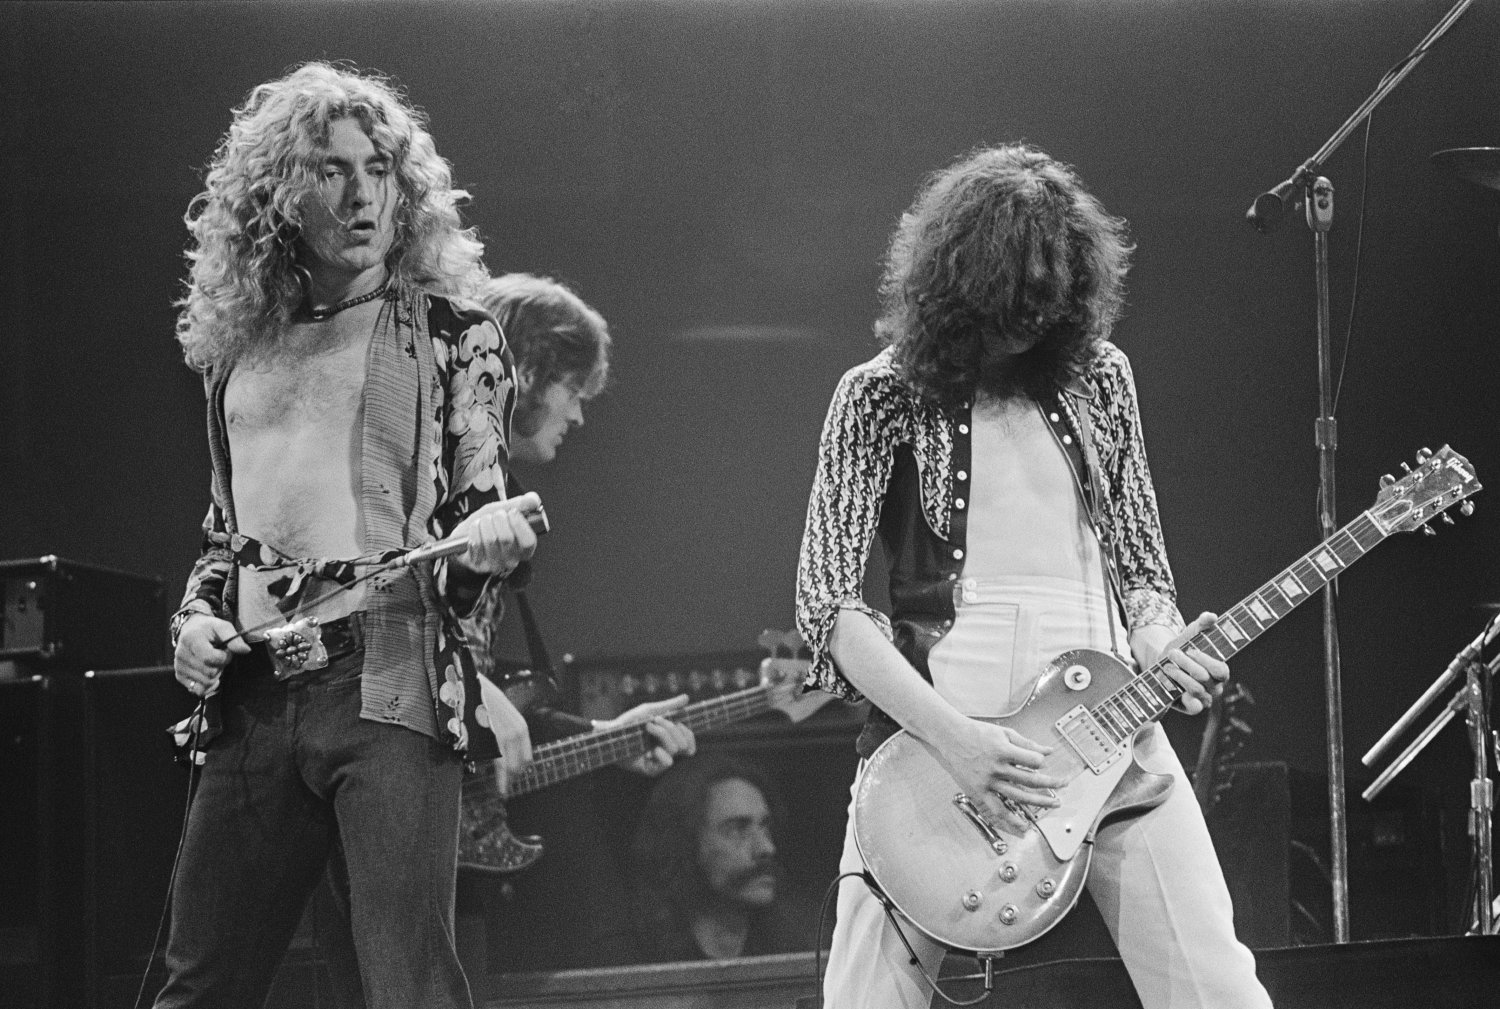 Led Zeppelin Style B Musical Poster 13x19 inches